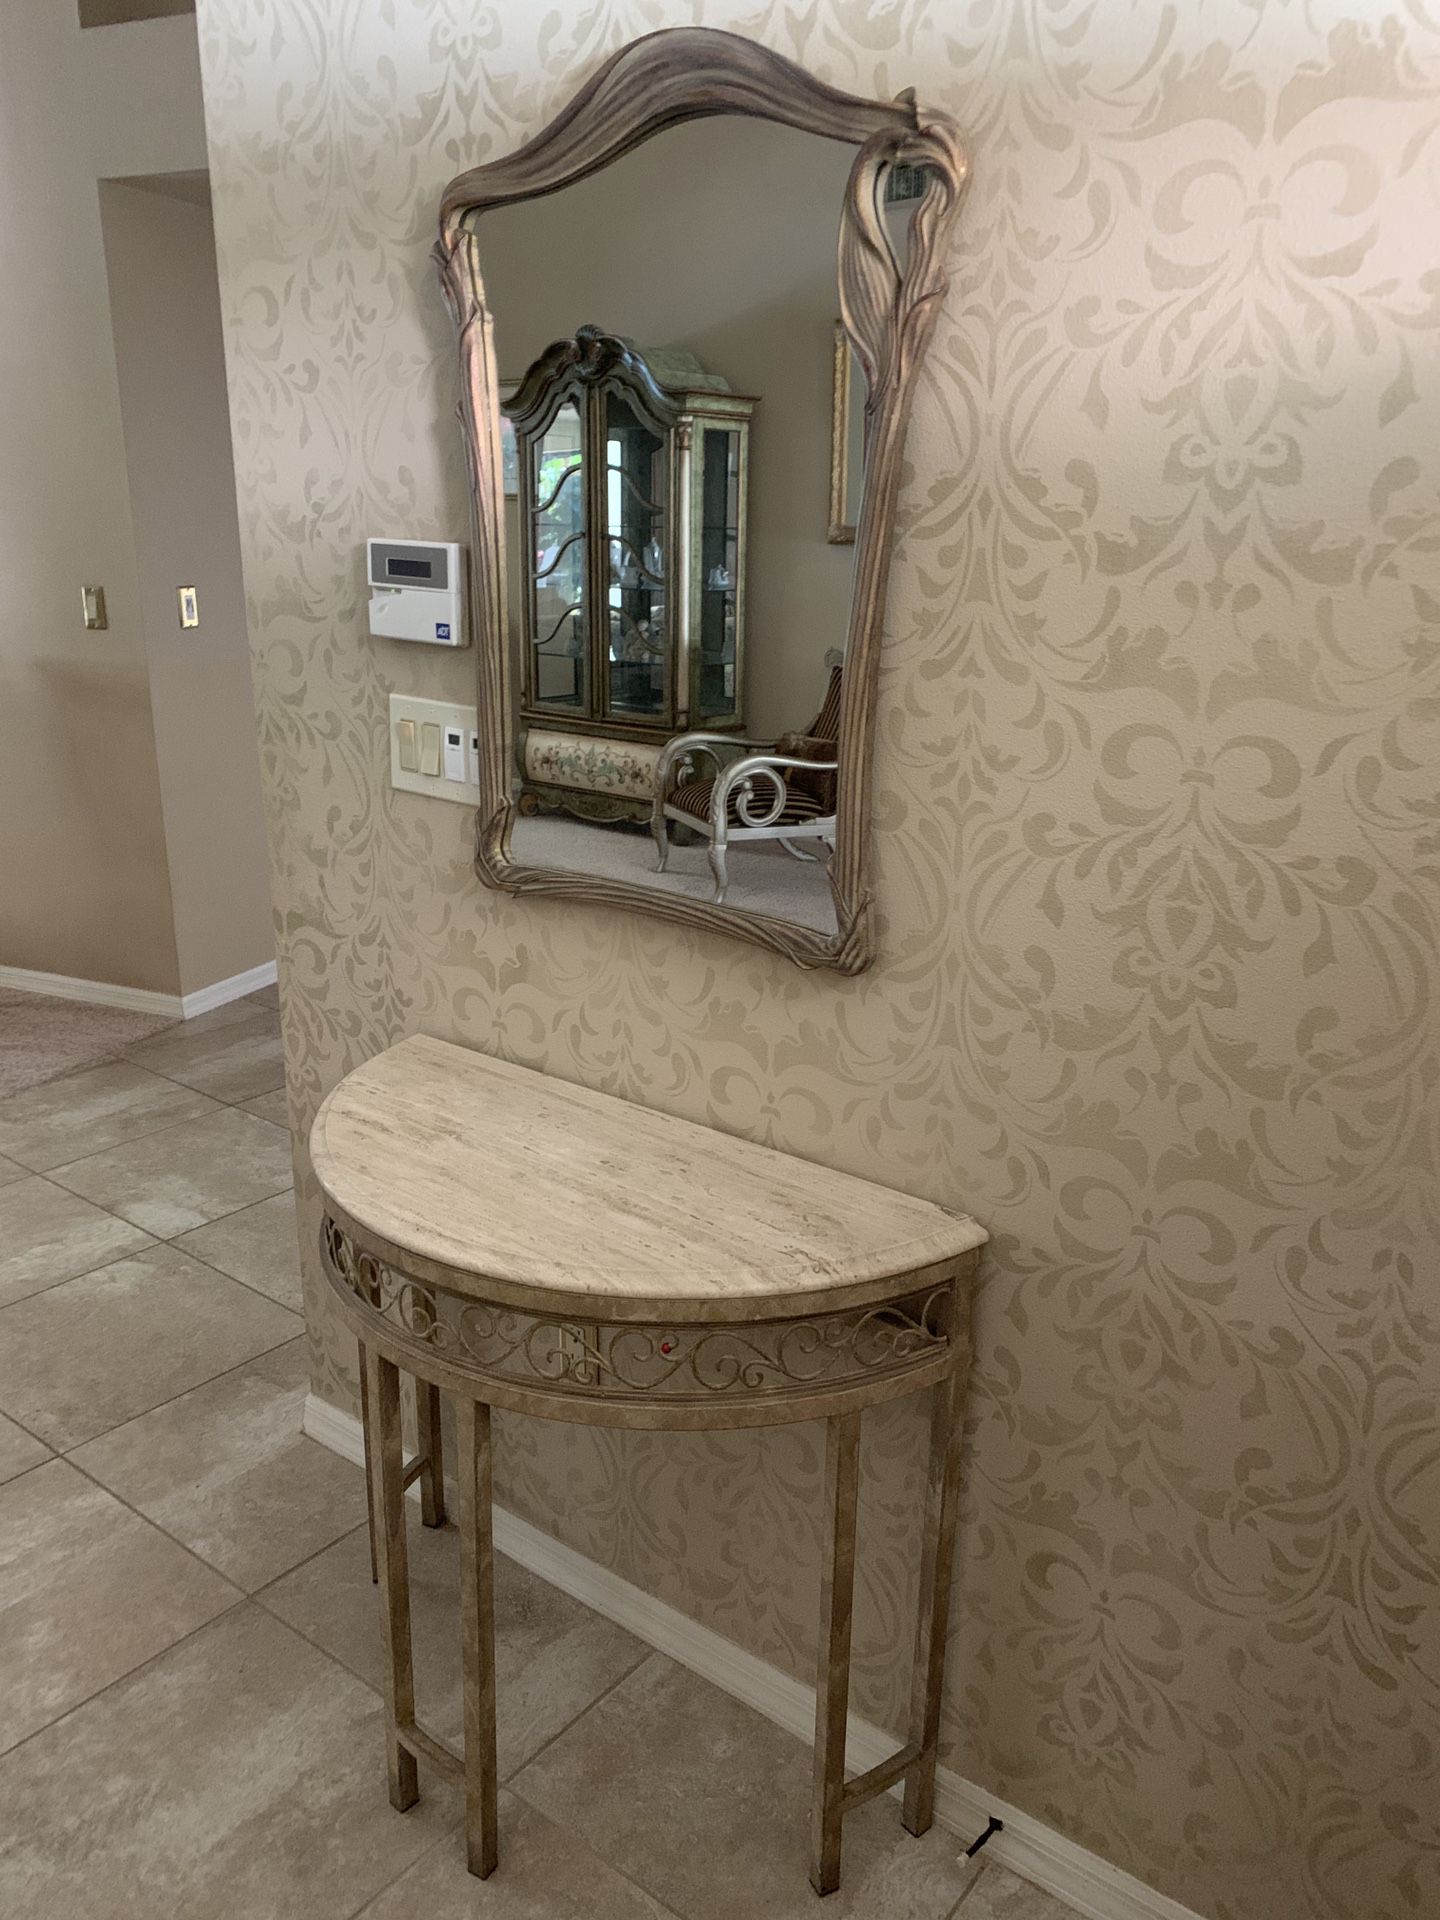 Entry way table with mirror